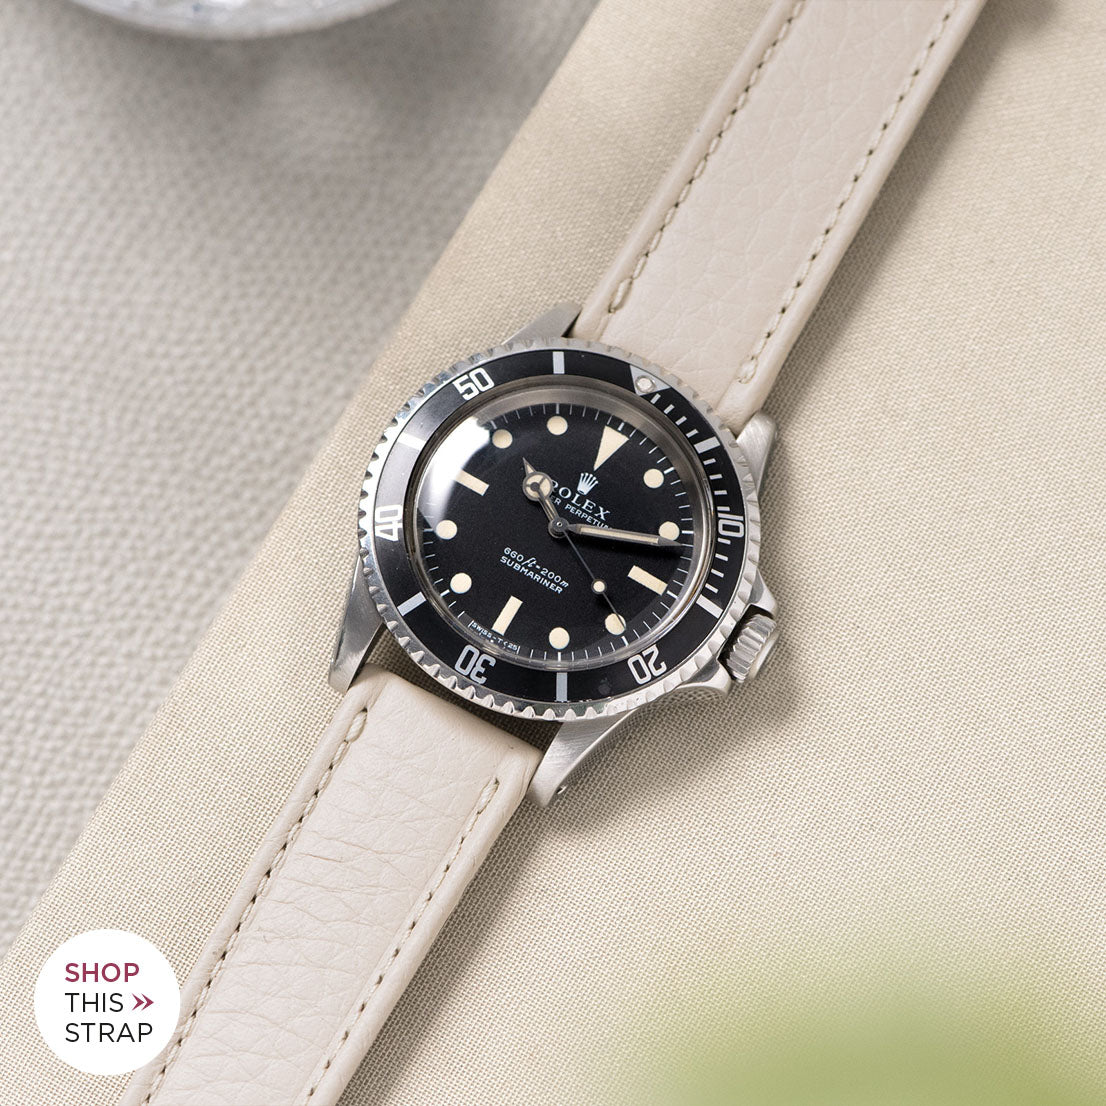 Bulang and Sons_Strap Guide_The Rolex 5513 Black Submariner_Taurillon Creme Heritage Leather Watch Strap